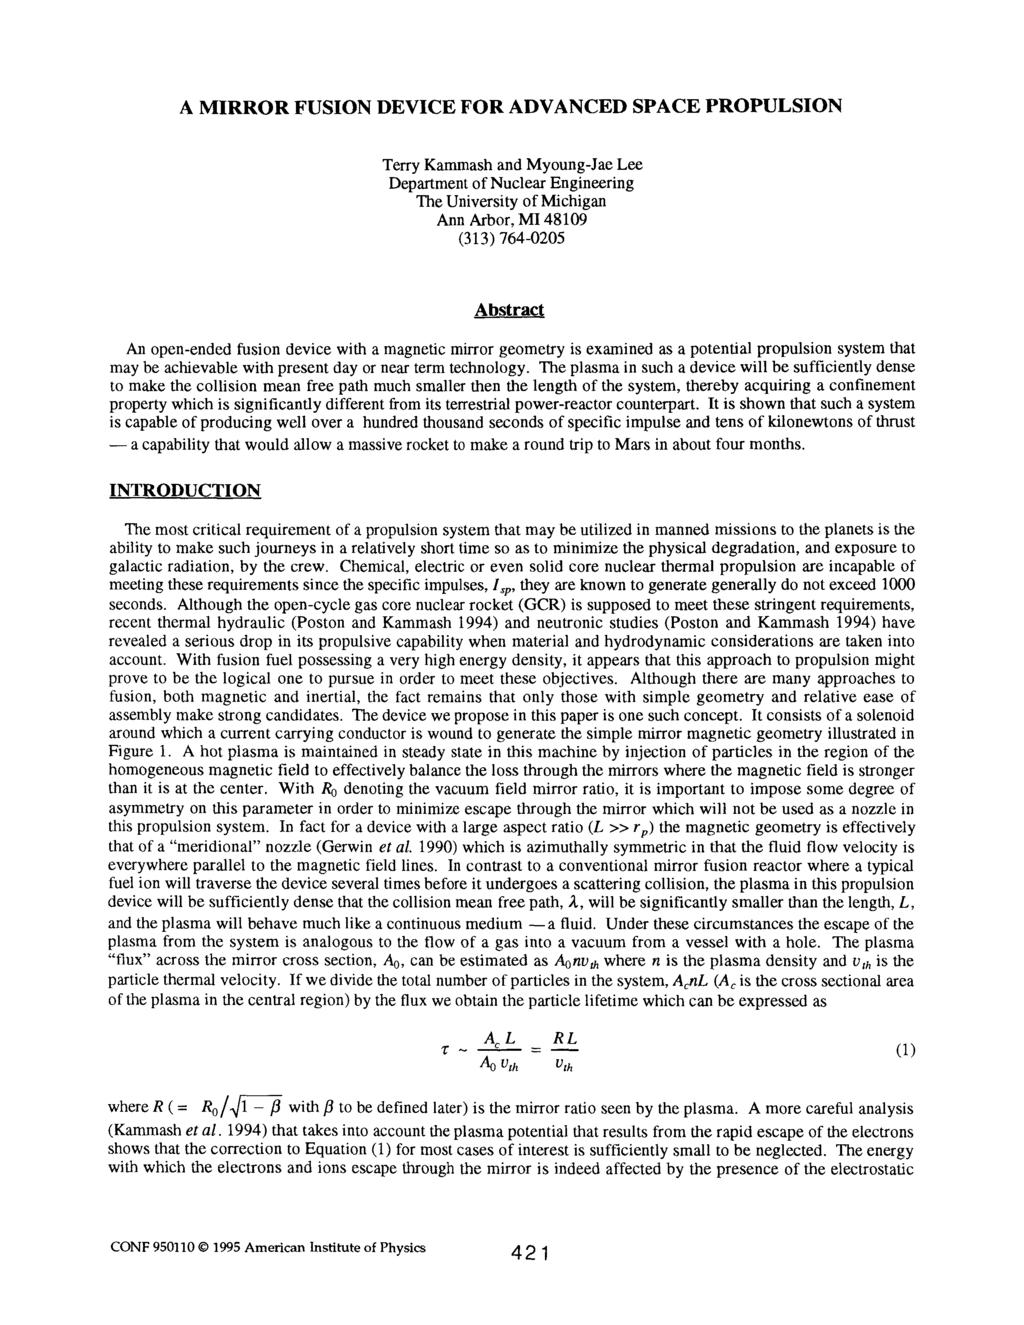 A MIRROR FUSION DEVICE FOR ADVANCED SPACE PROPULSION Terry Kammash and Myoung-Jae Lee Department of Nuclear Engineering The University of Michigan Ann Arbor, M148109 (313) 764-0205 Abstract An